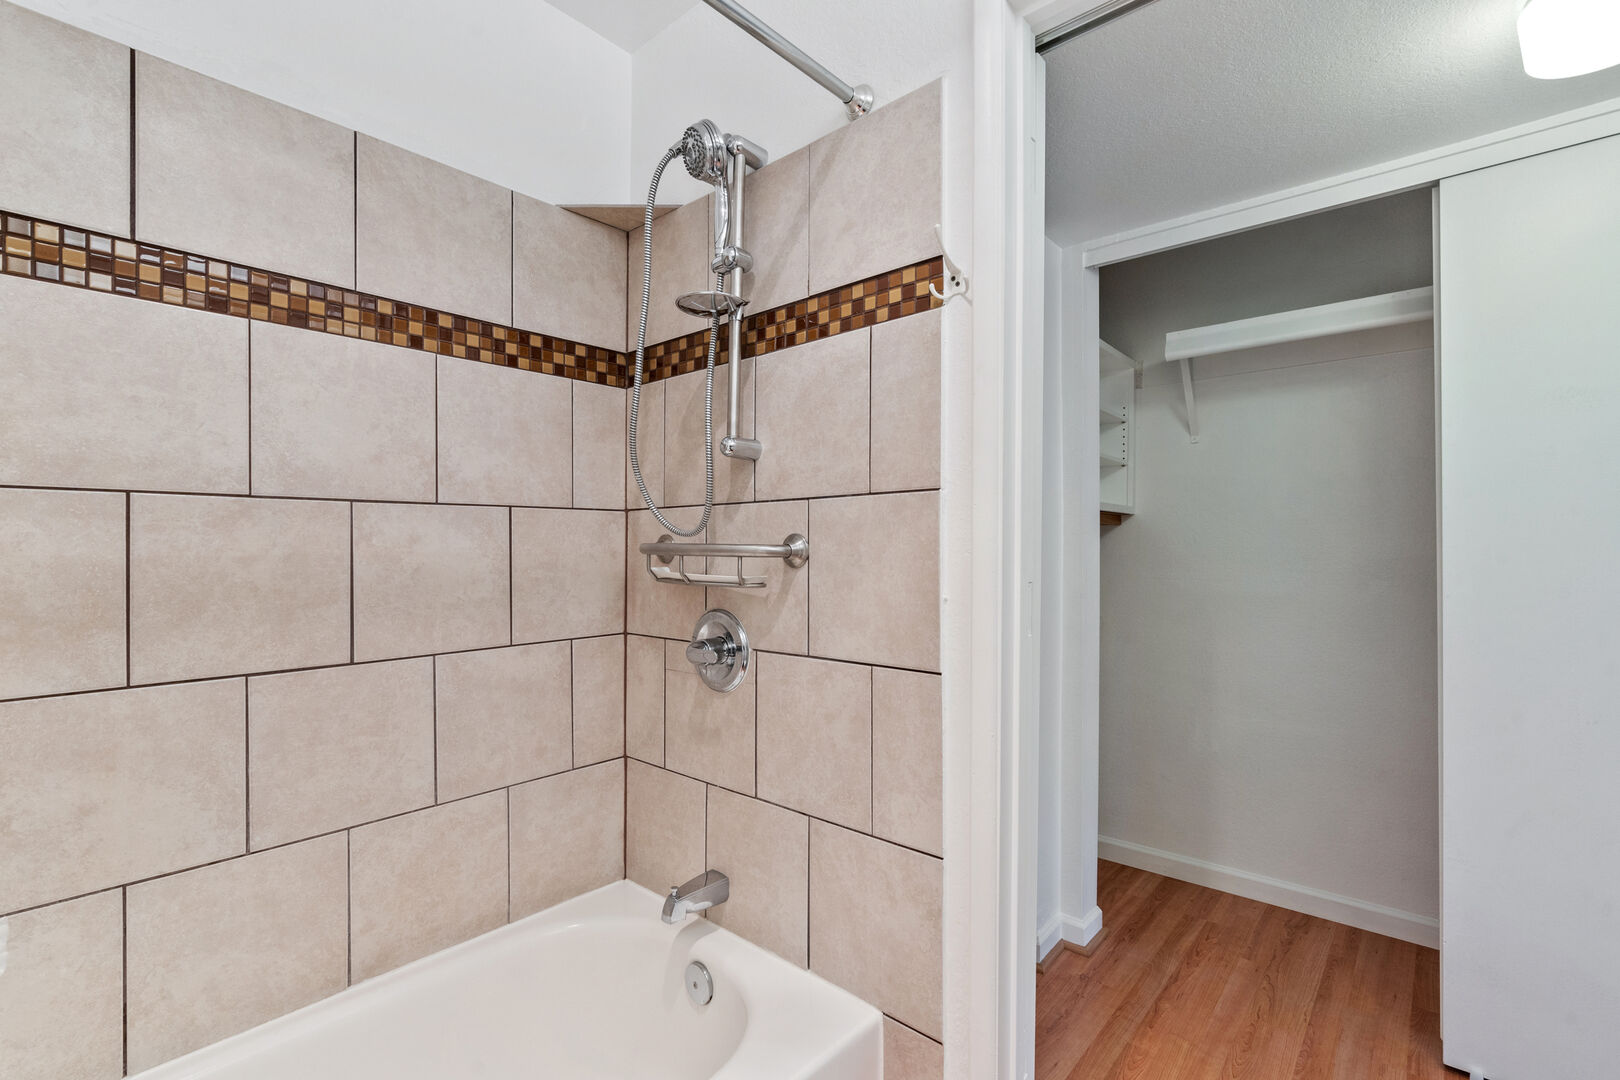 Master bath includes a large closet and has both a shower and tub.